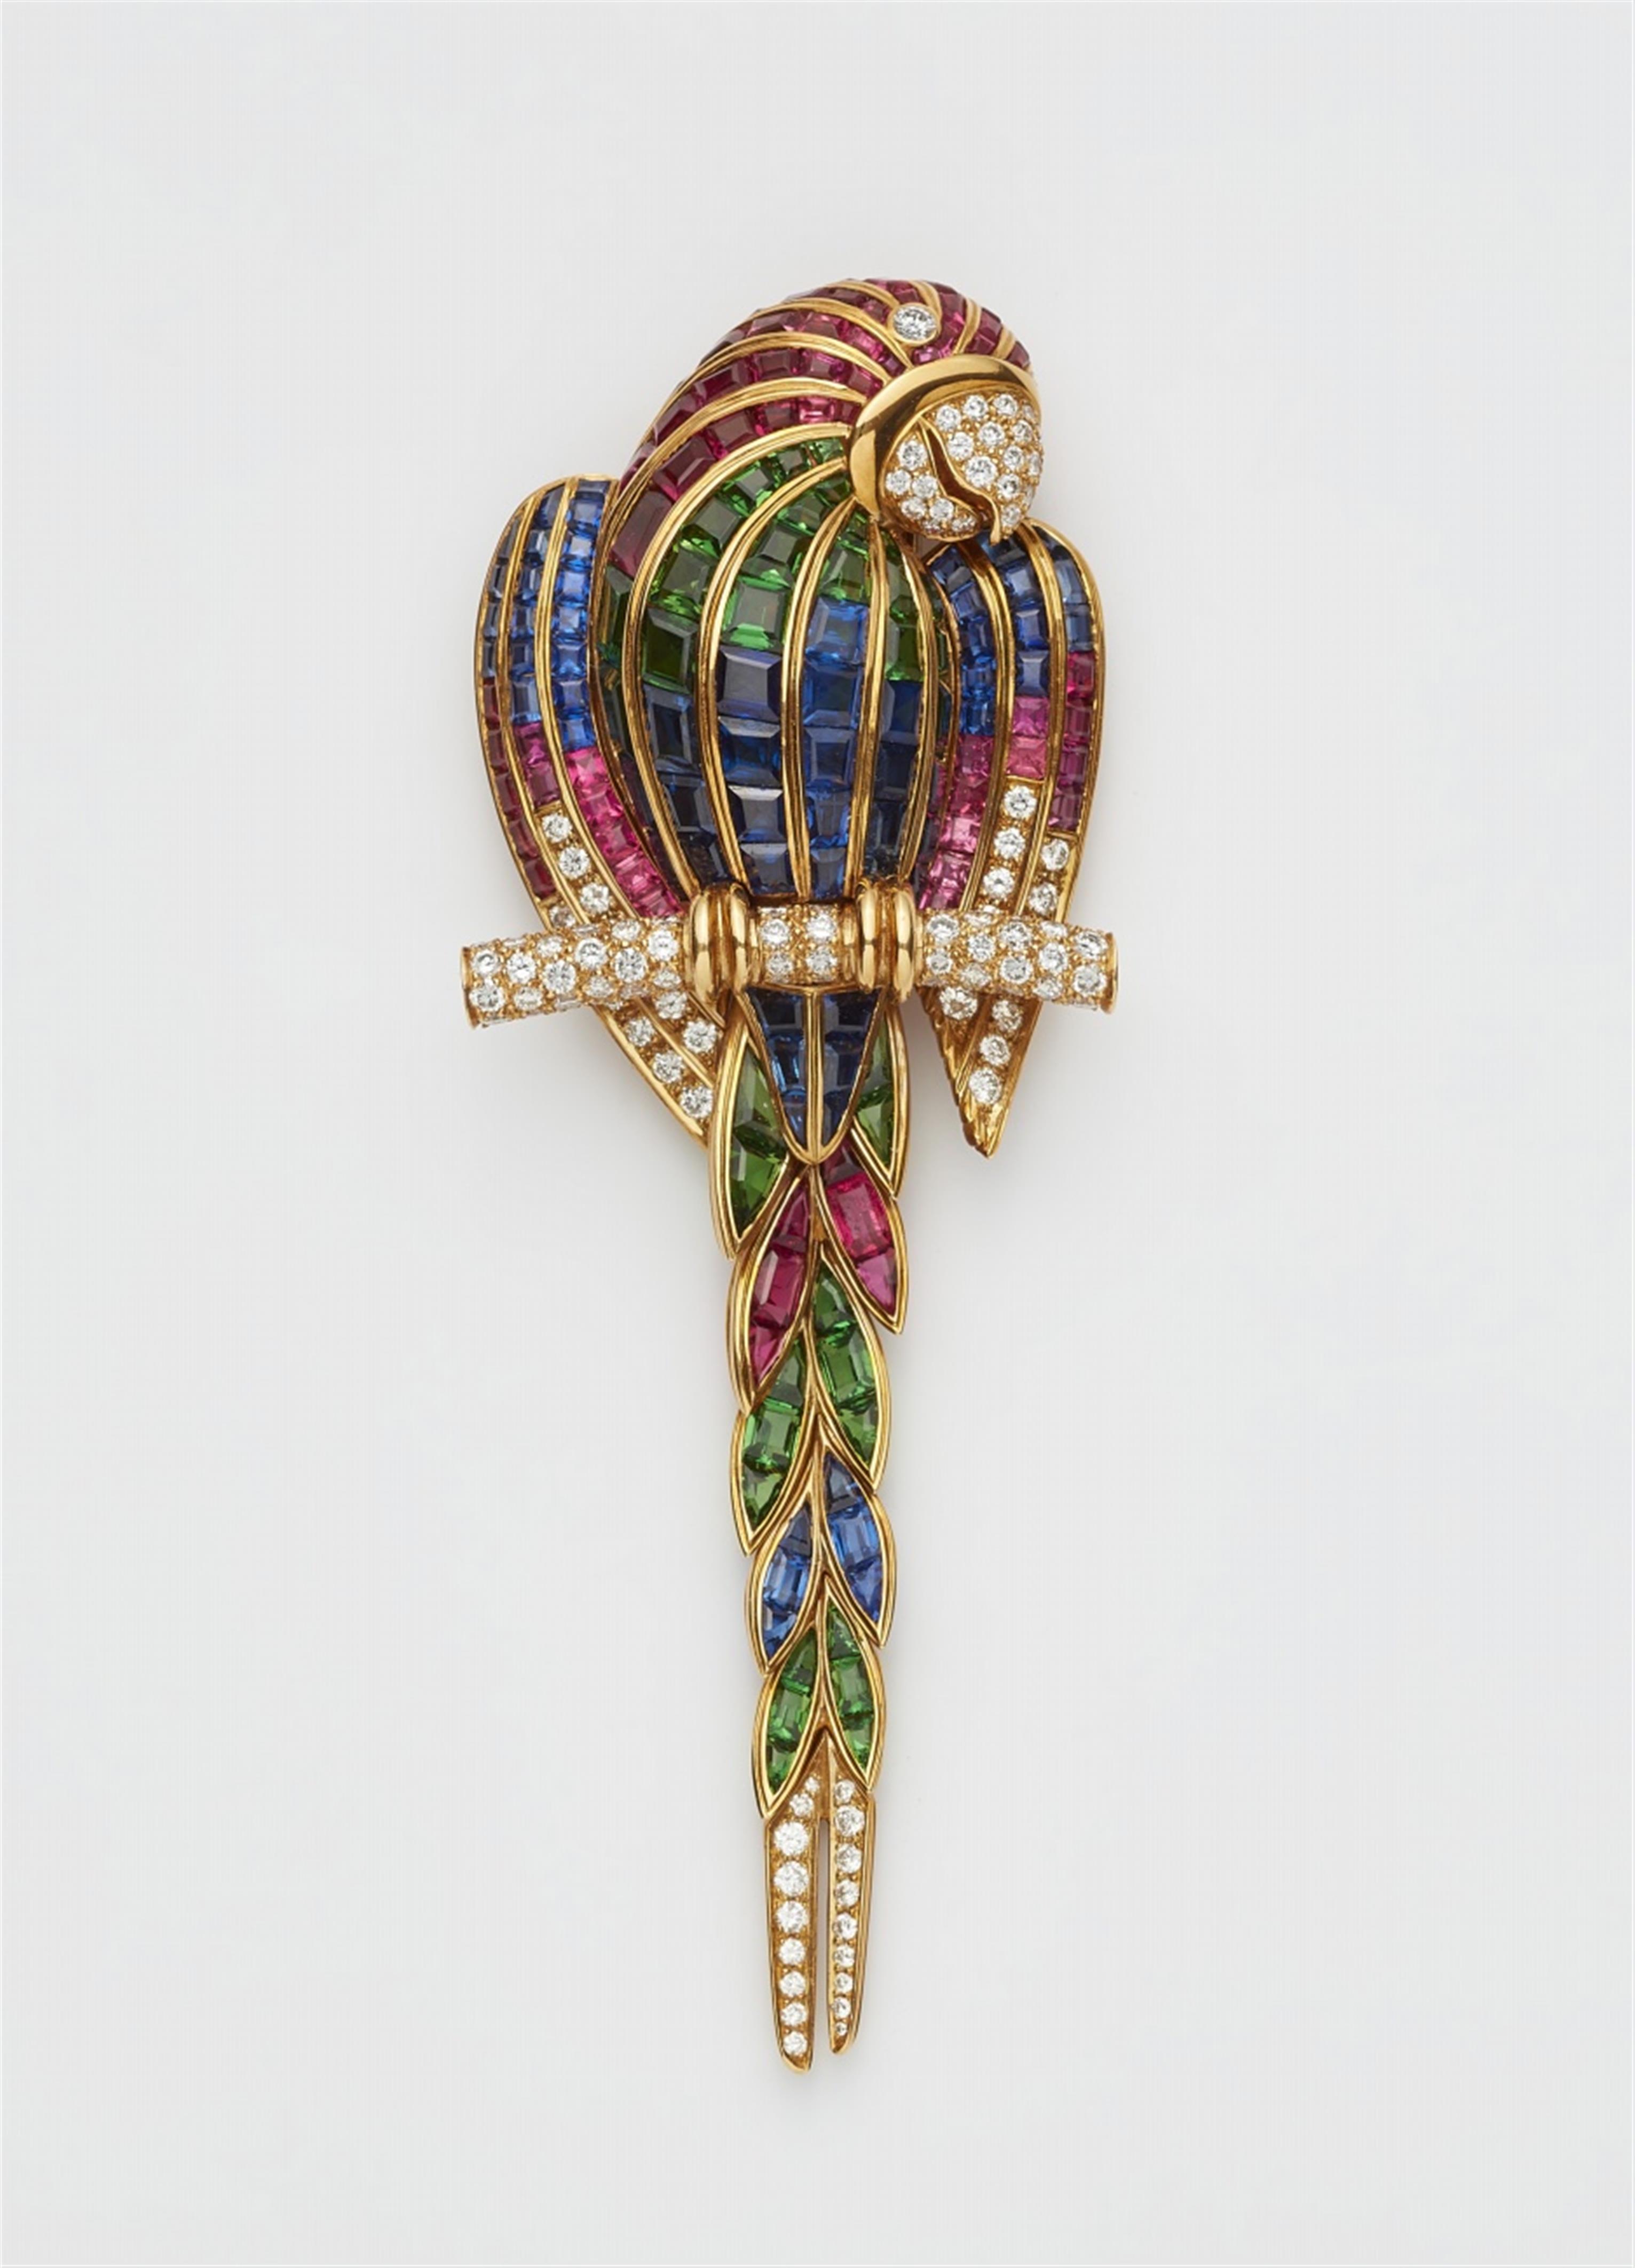 An 18k gold diamond and gemstone clip brooch "parrot" - image-1